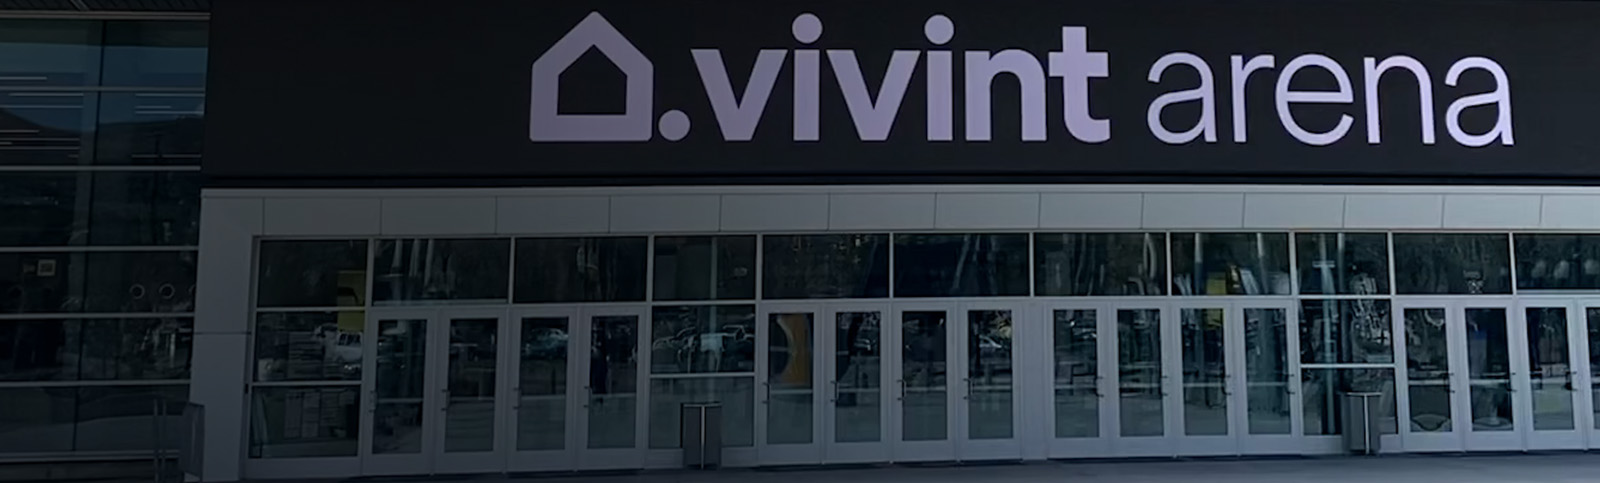 AT&T 5G+ is available at the Vivint Arena in Salt Lake City